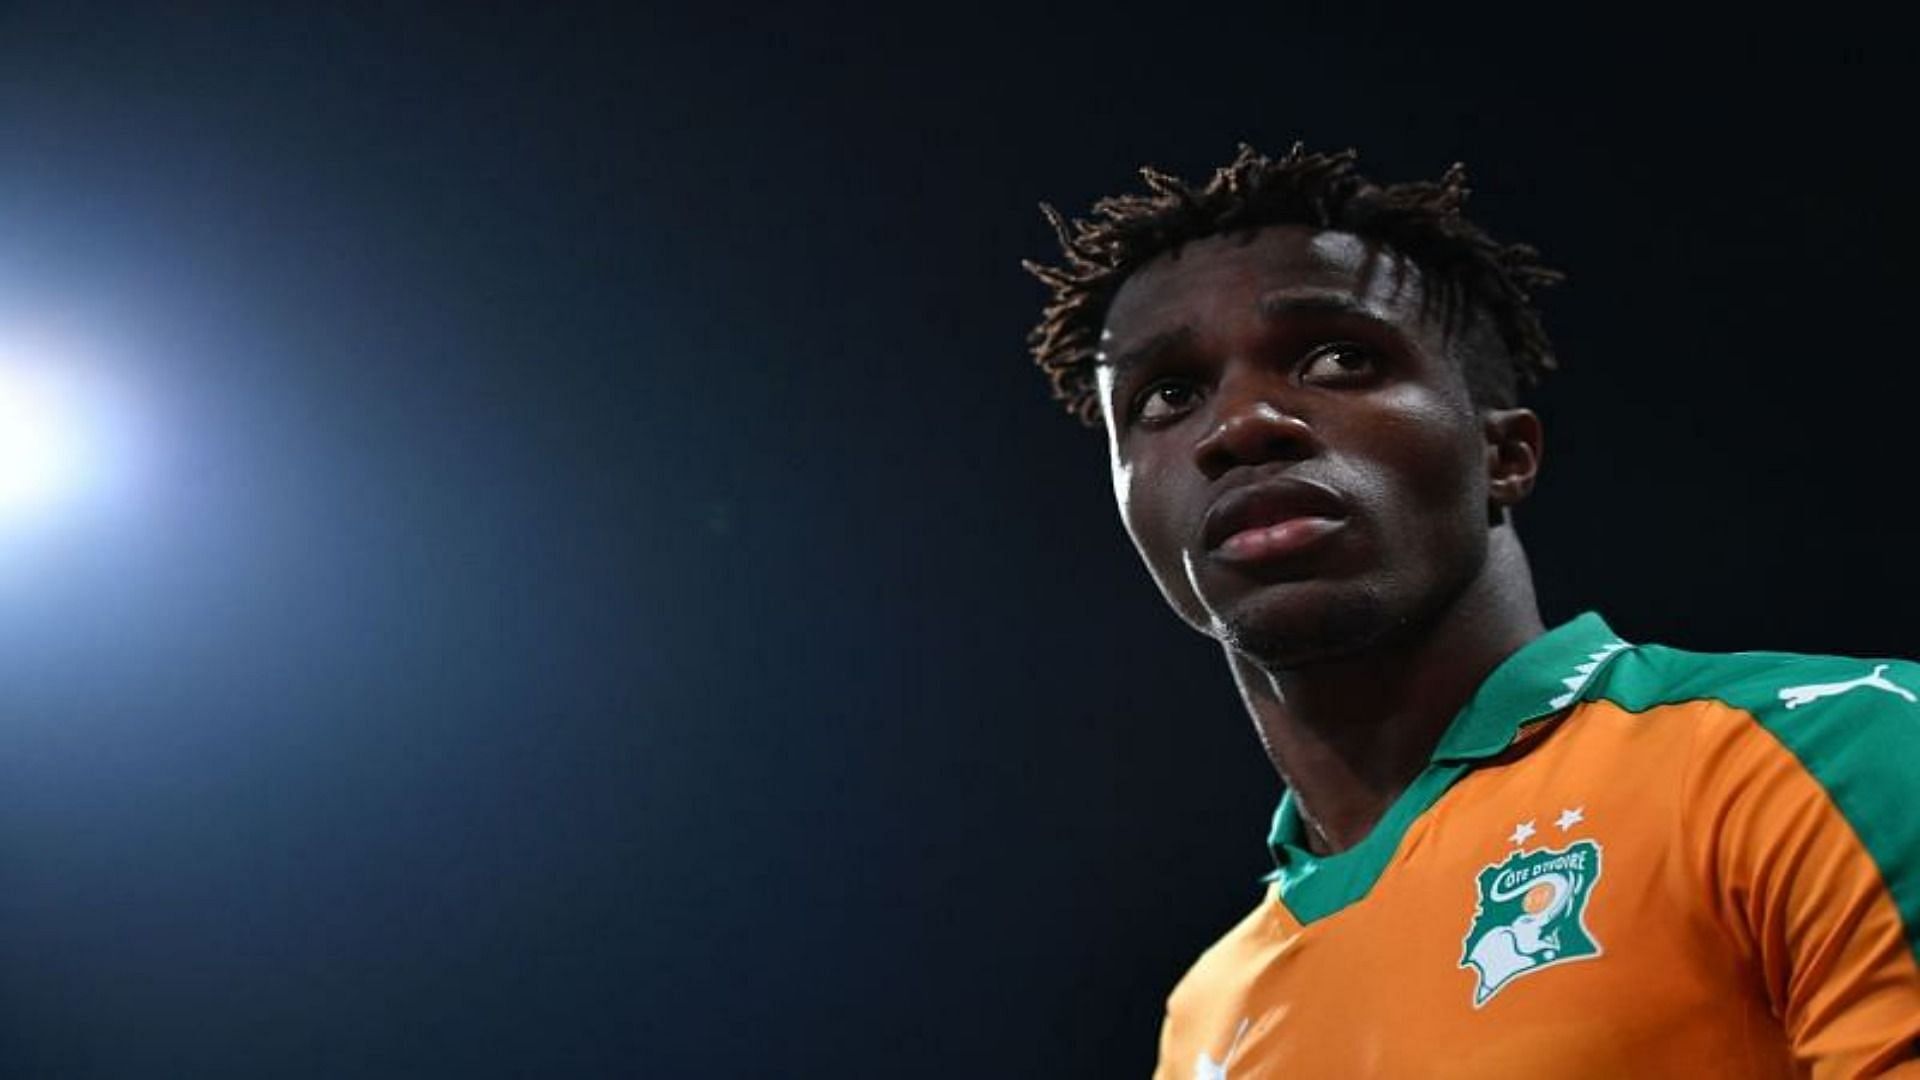 Zaha was requested to play for England but decided to play for his home nation Ivory Coast.